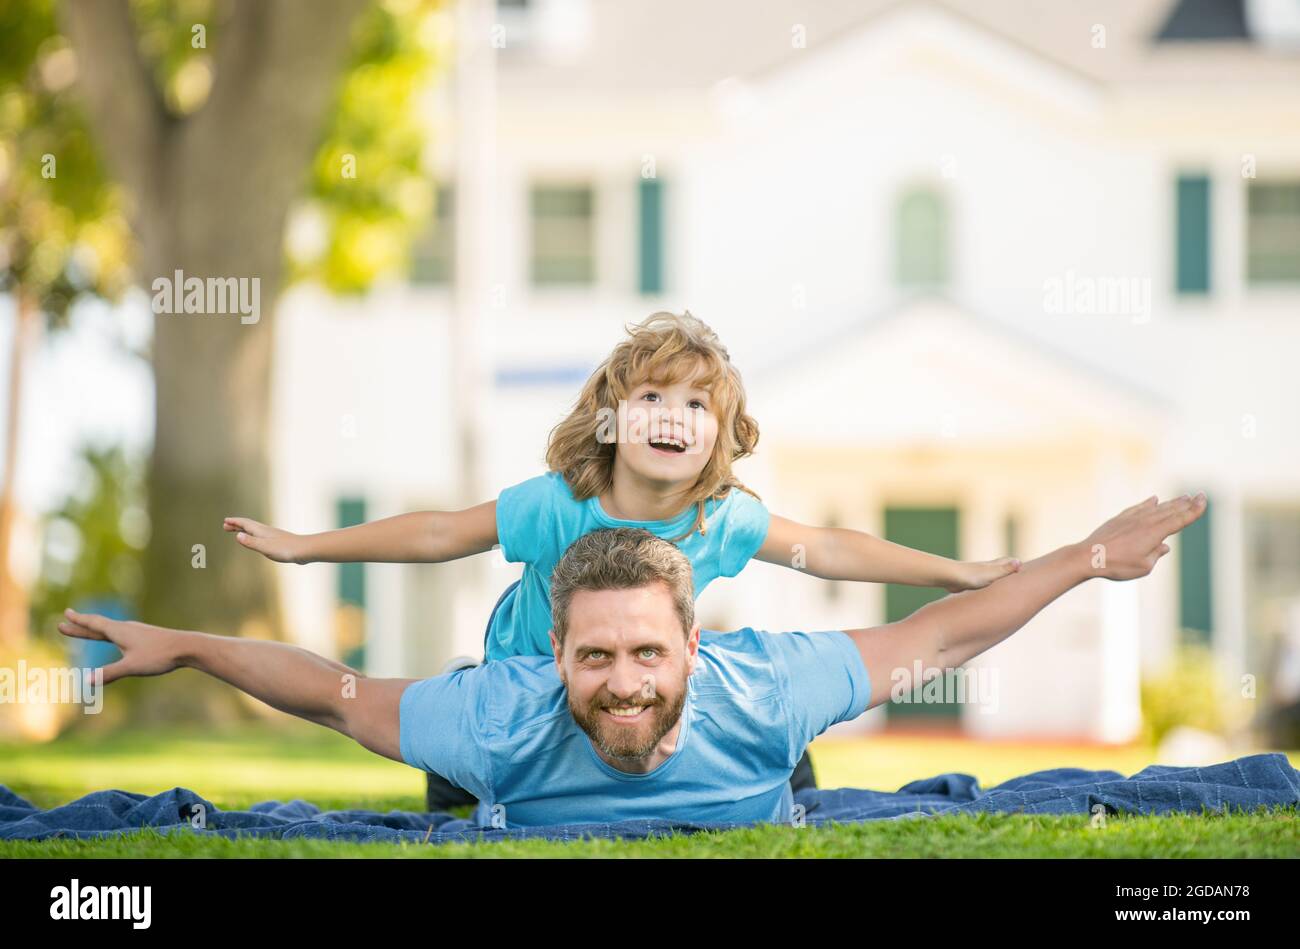 family value. childhood and parenthood. parent rest with little child boy on grass Stock Photo